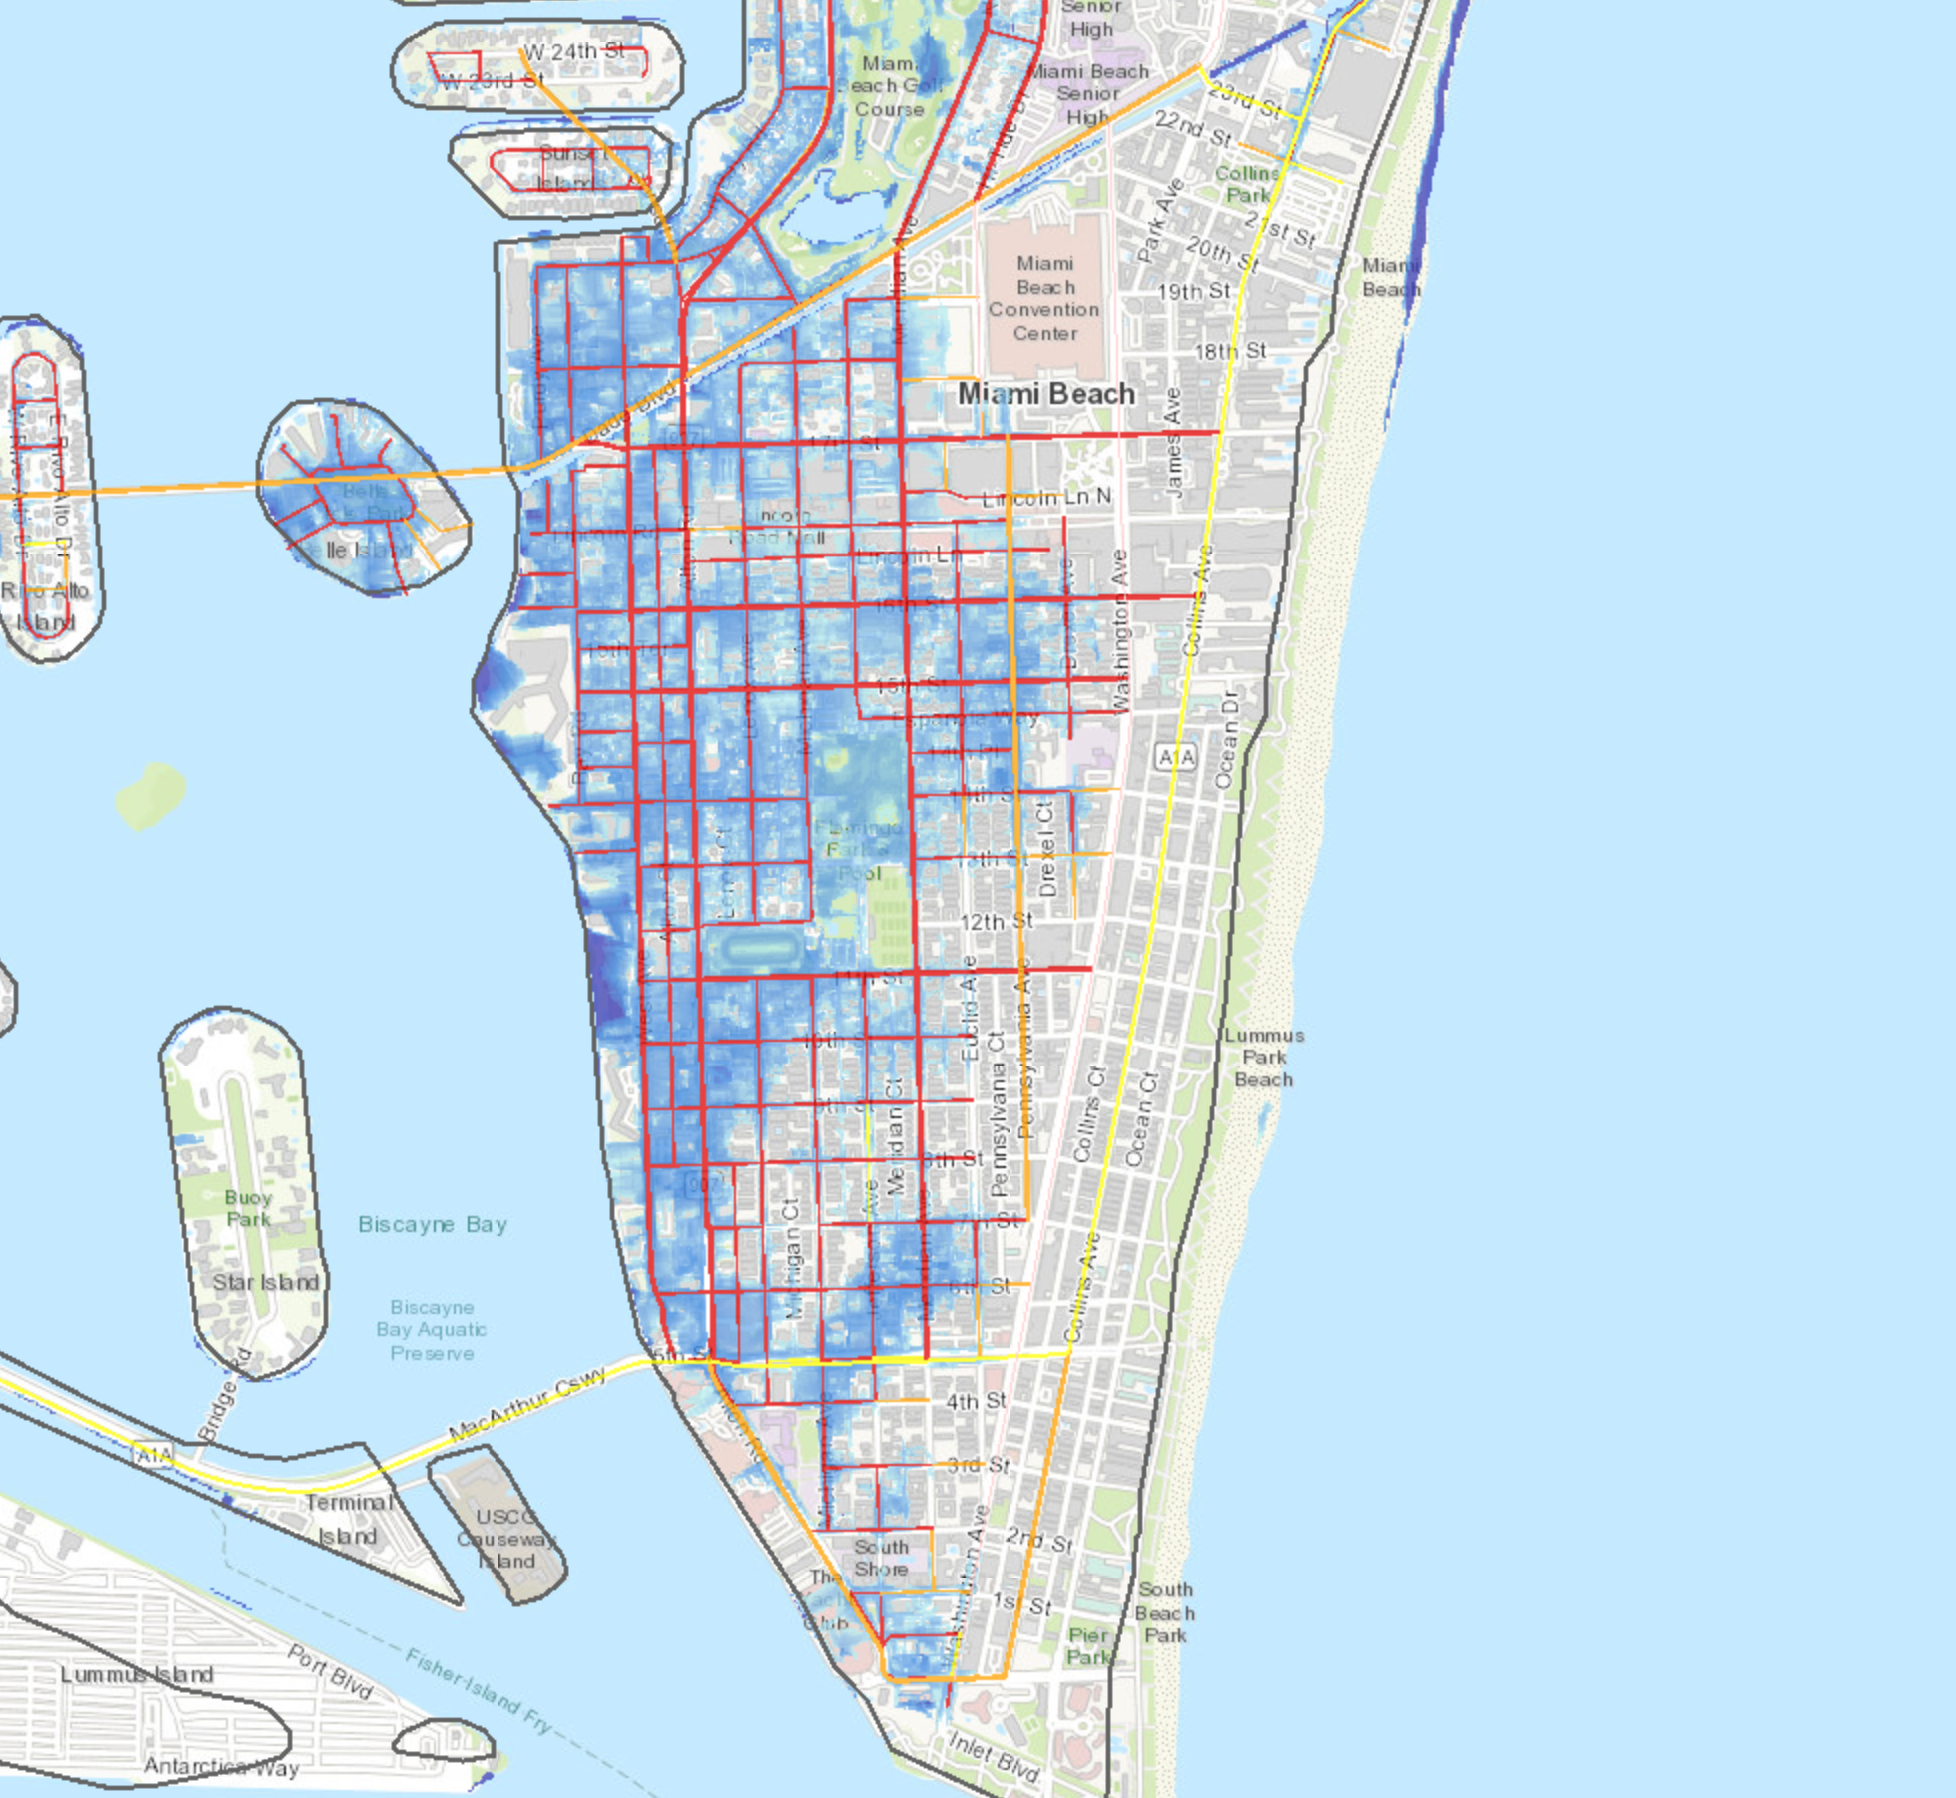 Figure 7. A mapping tool shows sea level rise (SLR) scenarios and affected transportation infrastructure in Miami Beach. Courtesy of University of Florida